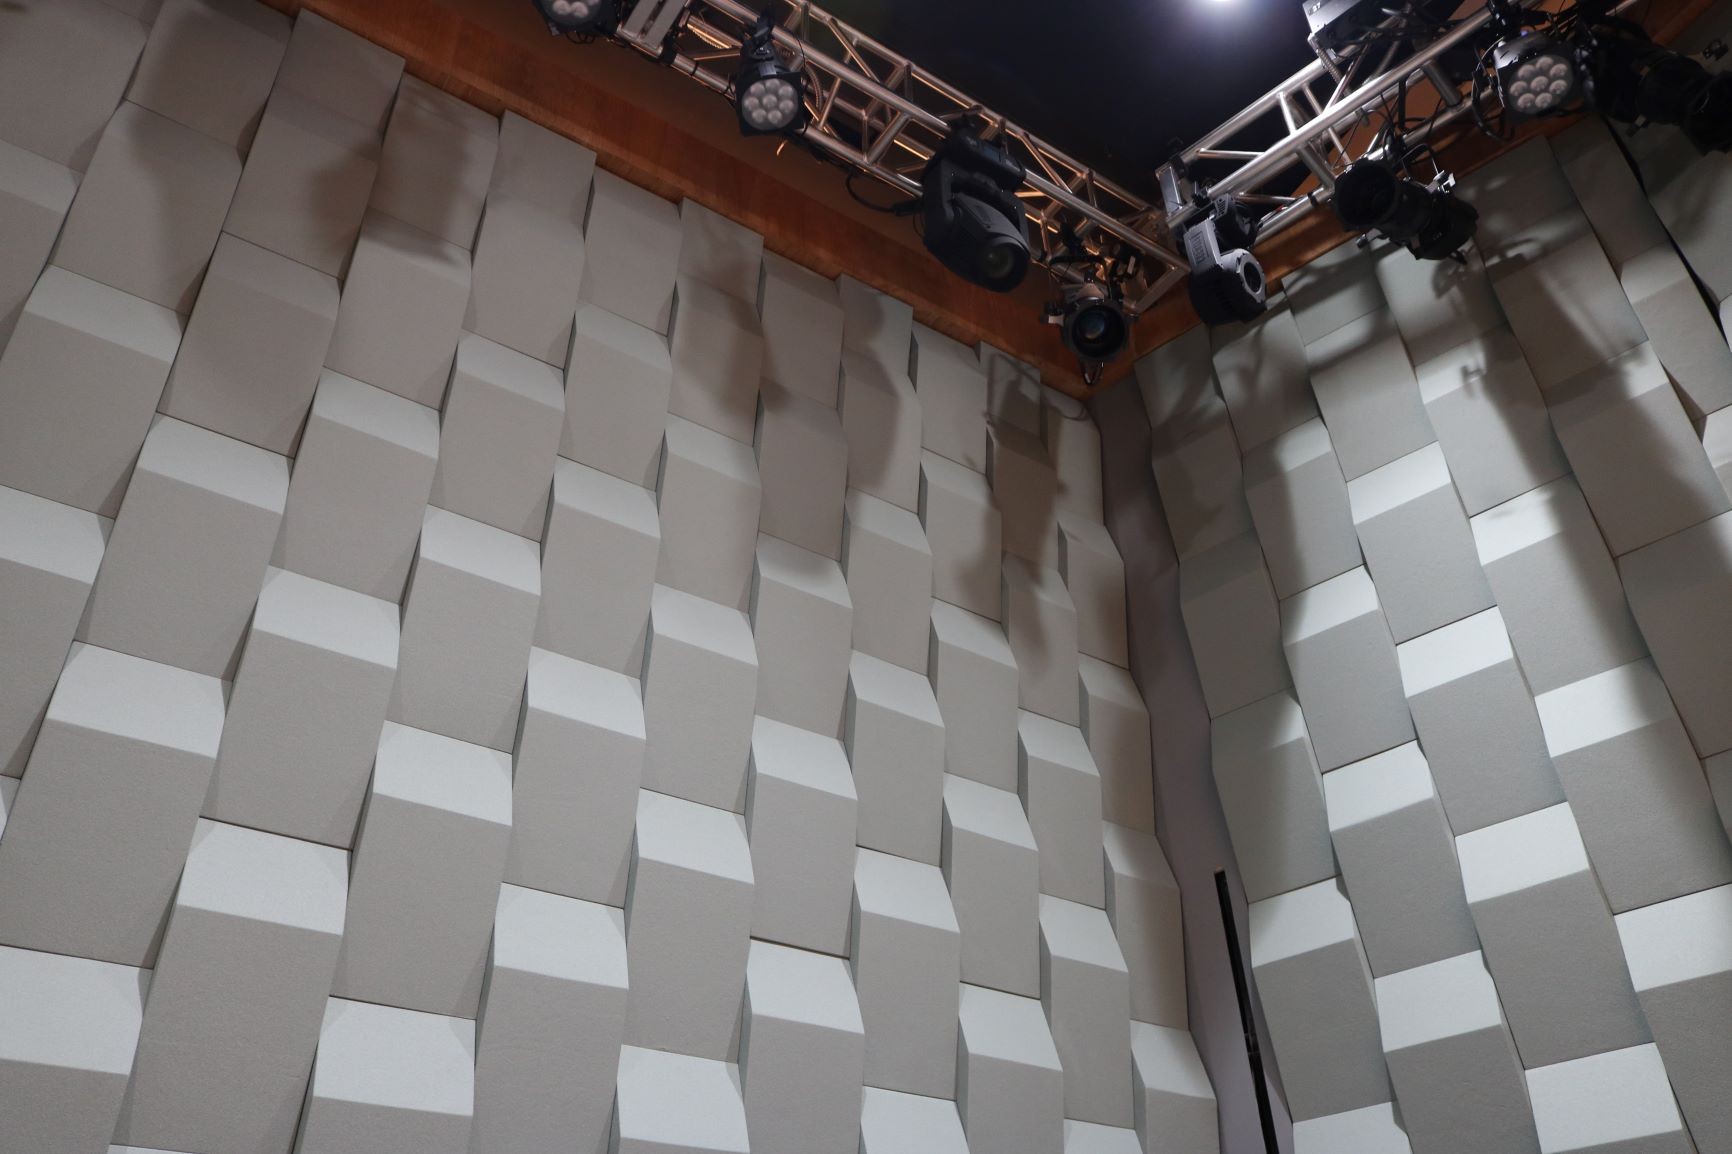 The entire space features acoustic treatment, like this acoustic wedge wall on the stage